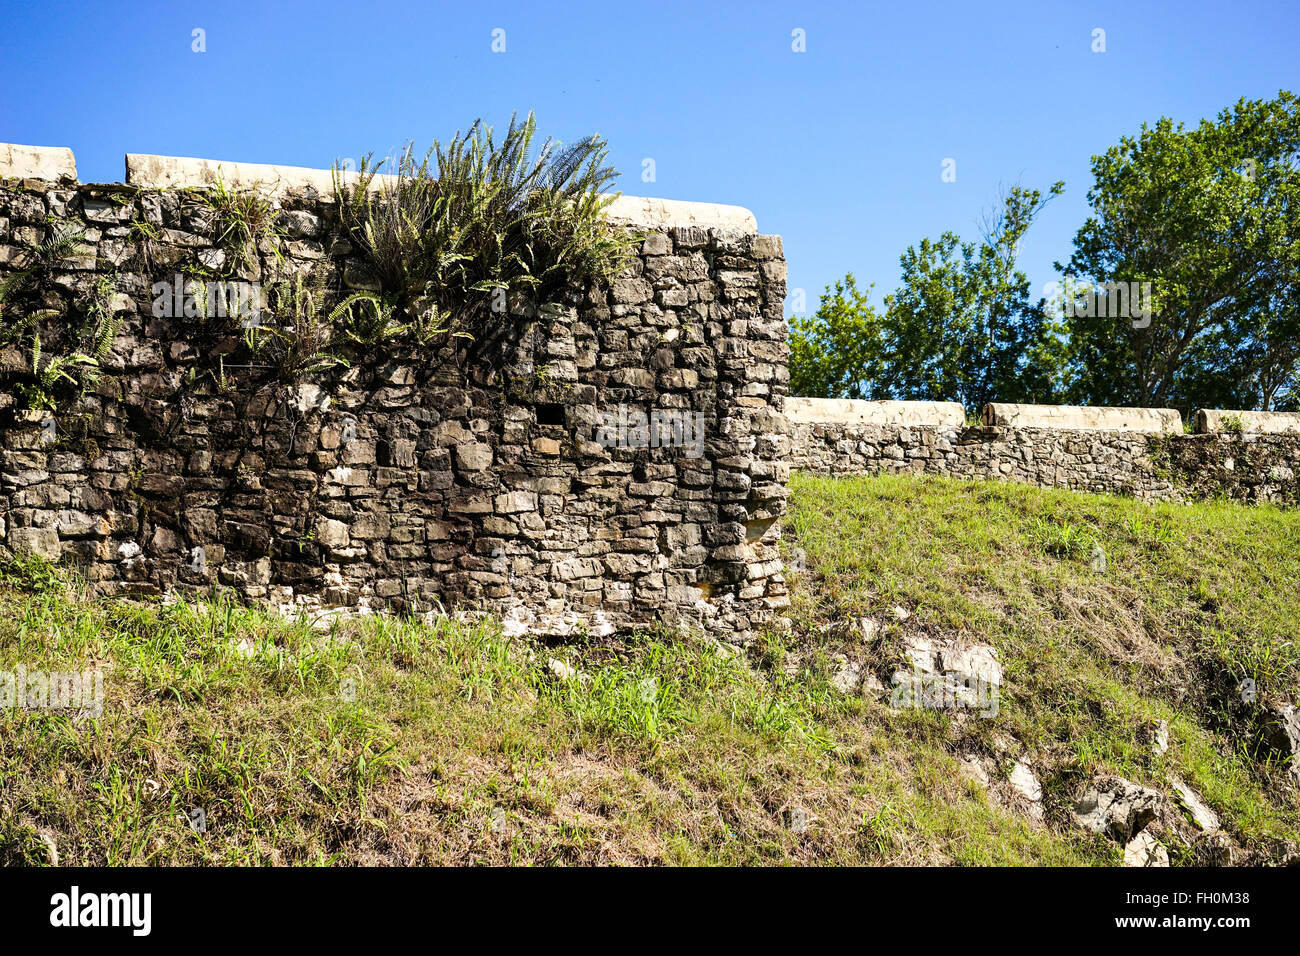 stone wall covered with plants in sunshine Stock Photo